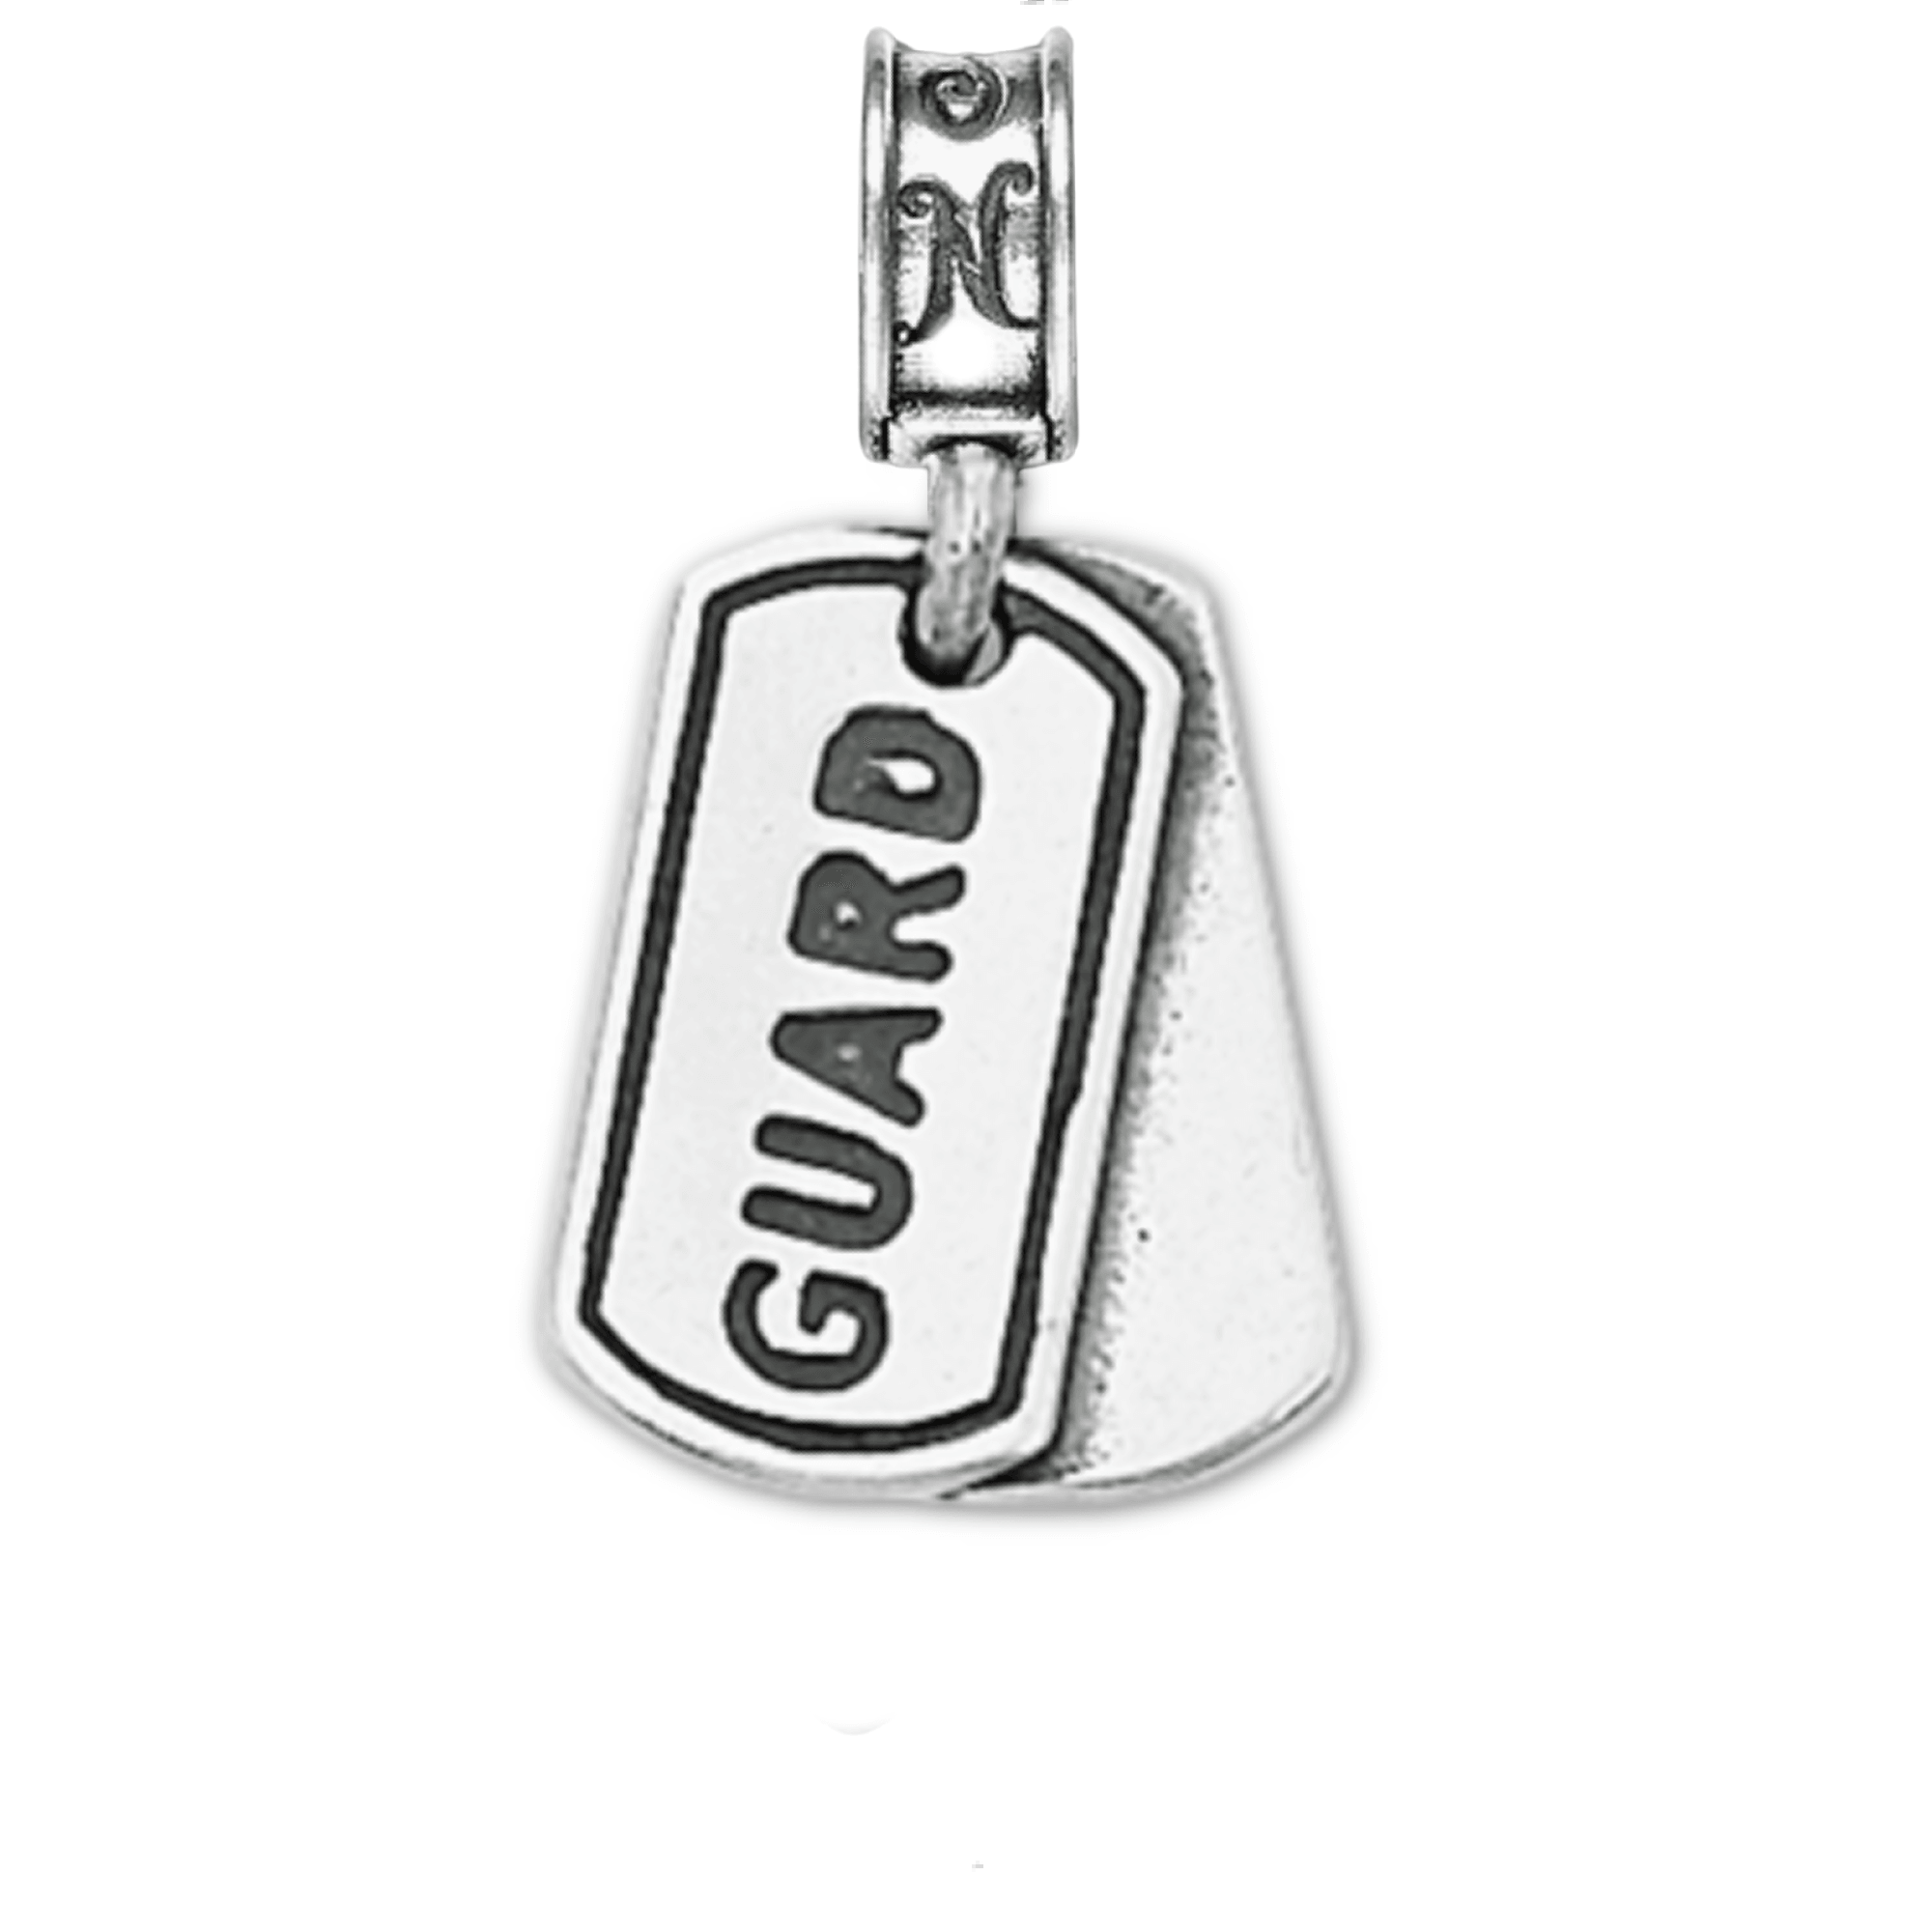 Military Jewelry, Military Charms, United States Army, Military Gifts, Air Force National Guard